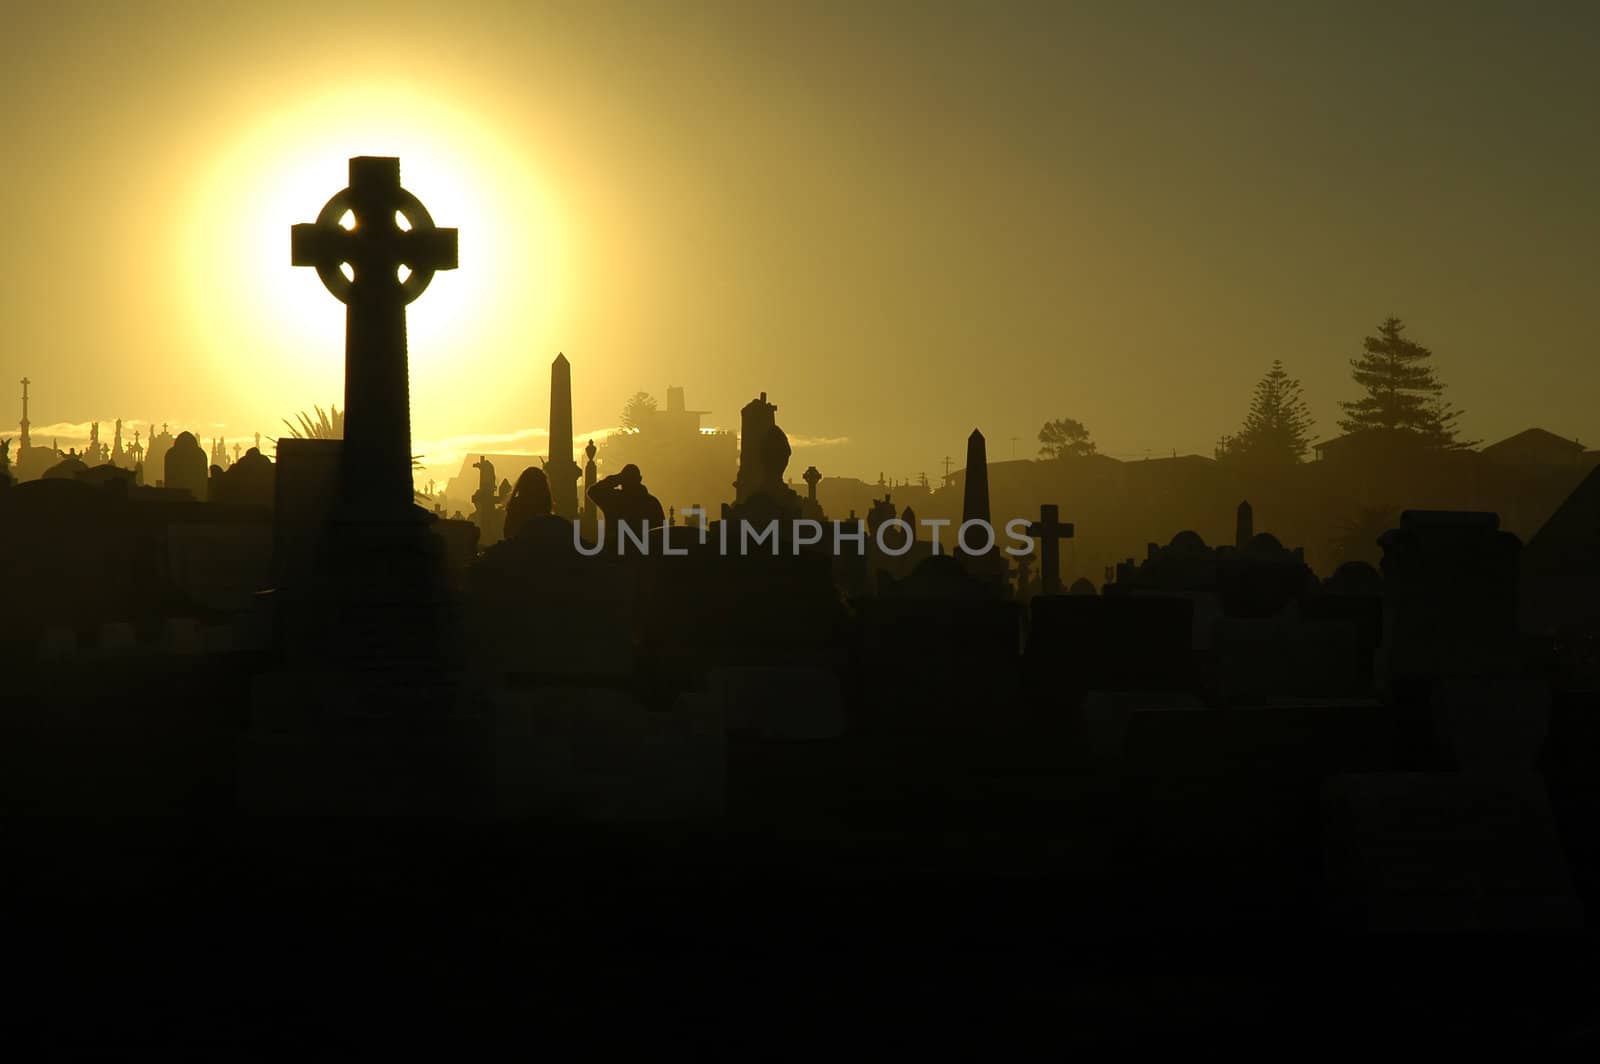 graves silhouettes, yellow sky, two mourning people